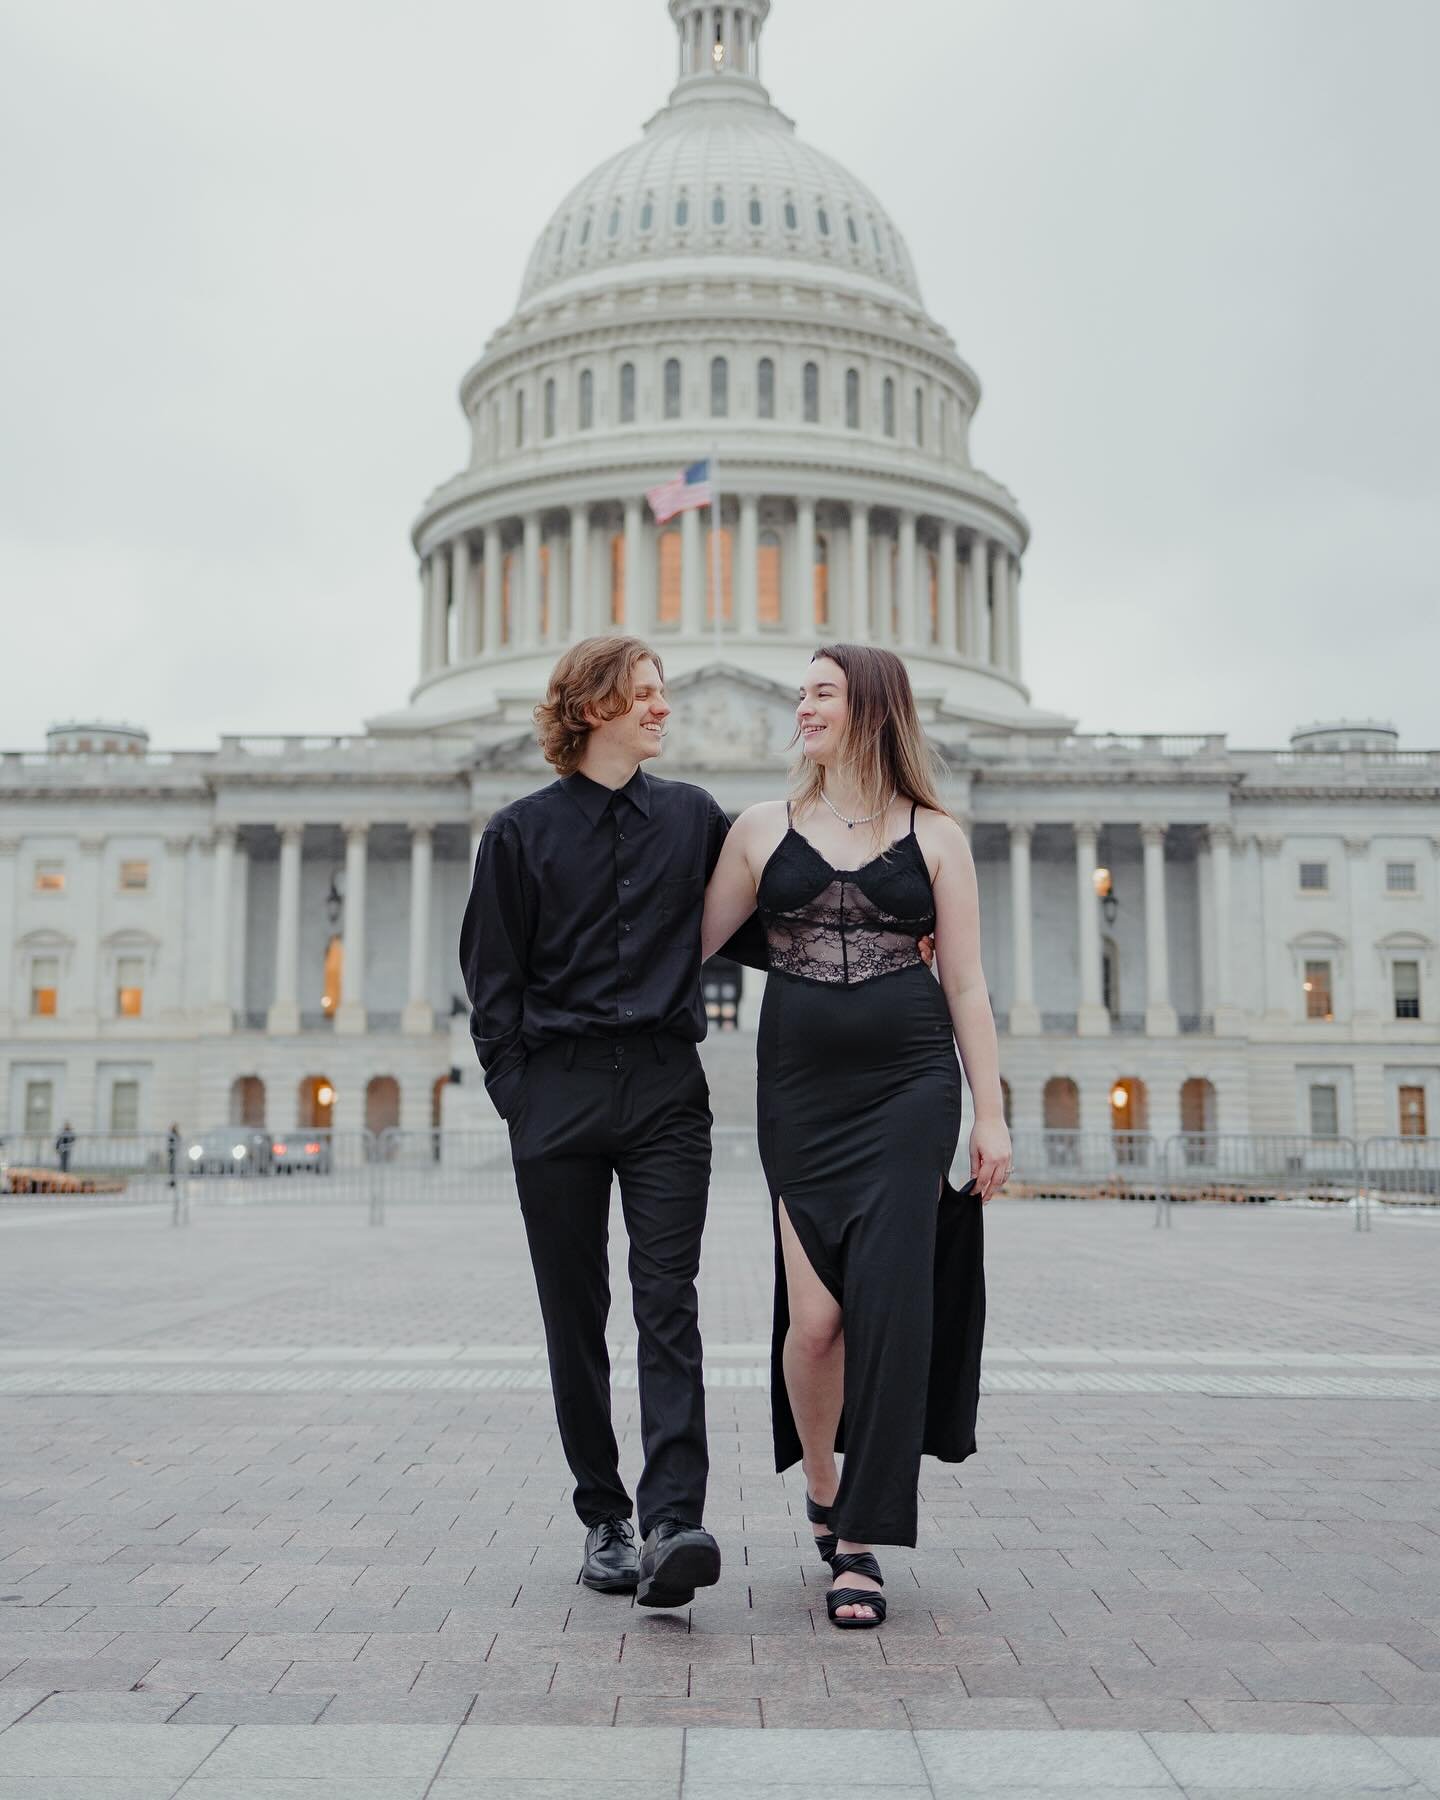 The anticipation was electric as I prepared for an engagement photoshoot at the esteemed US Capitol and Supreme Court Building, the couple adorned in timeless black attire. Envisioning them amidst the pillars of democracy, I felt a blend of excitemen